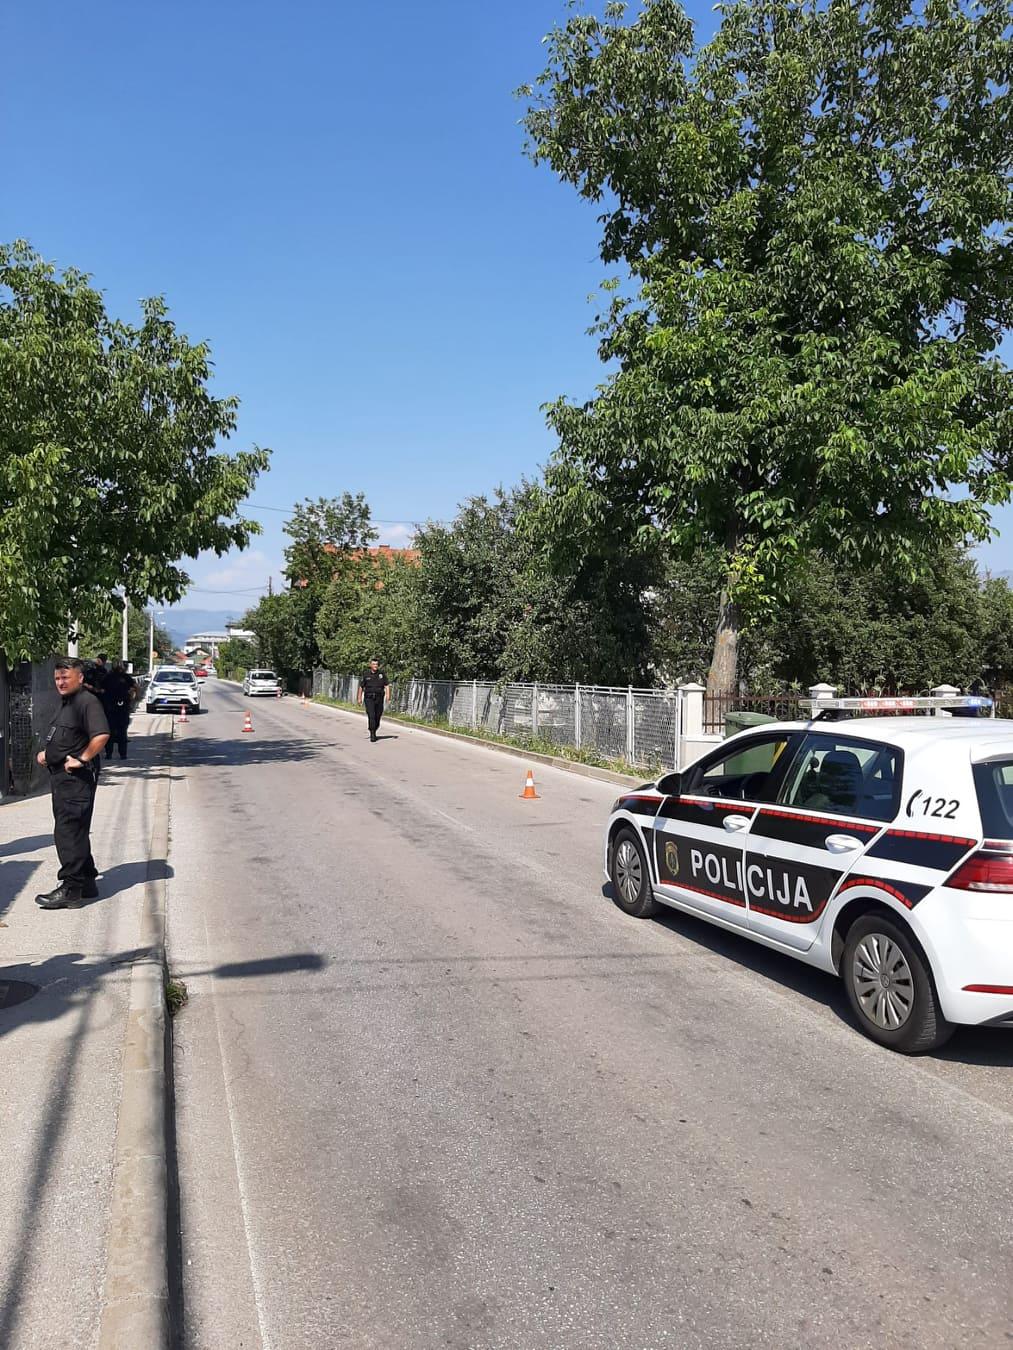 Police are conducting an investigation - Avaz